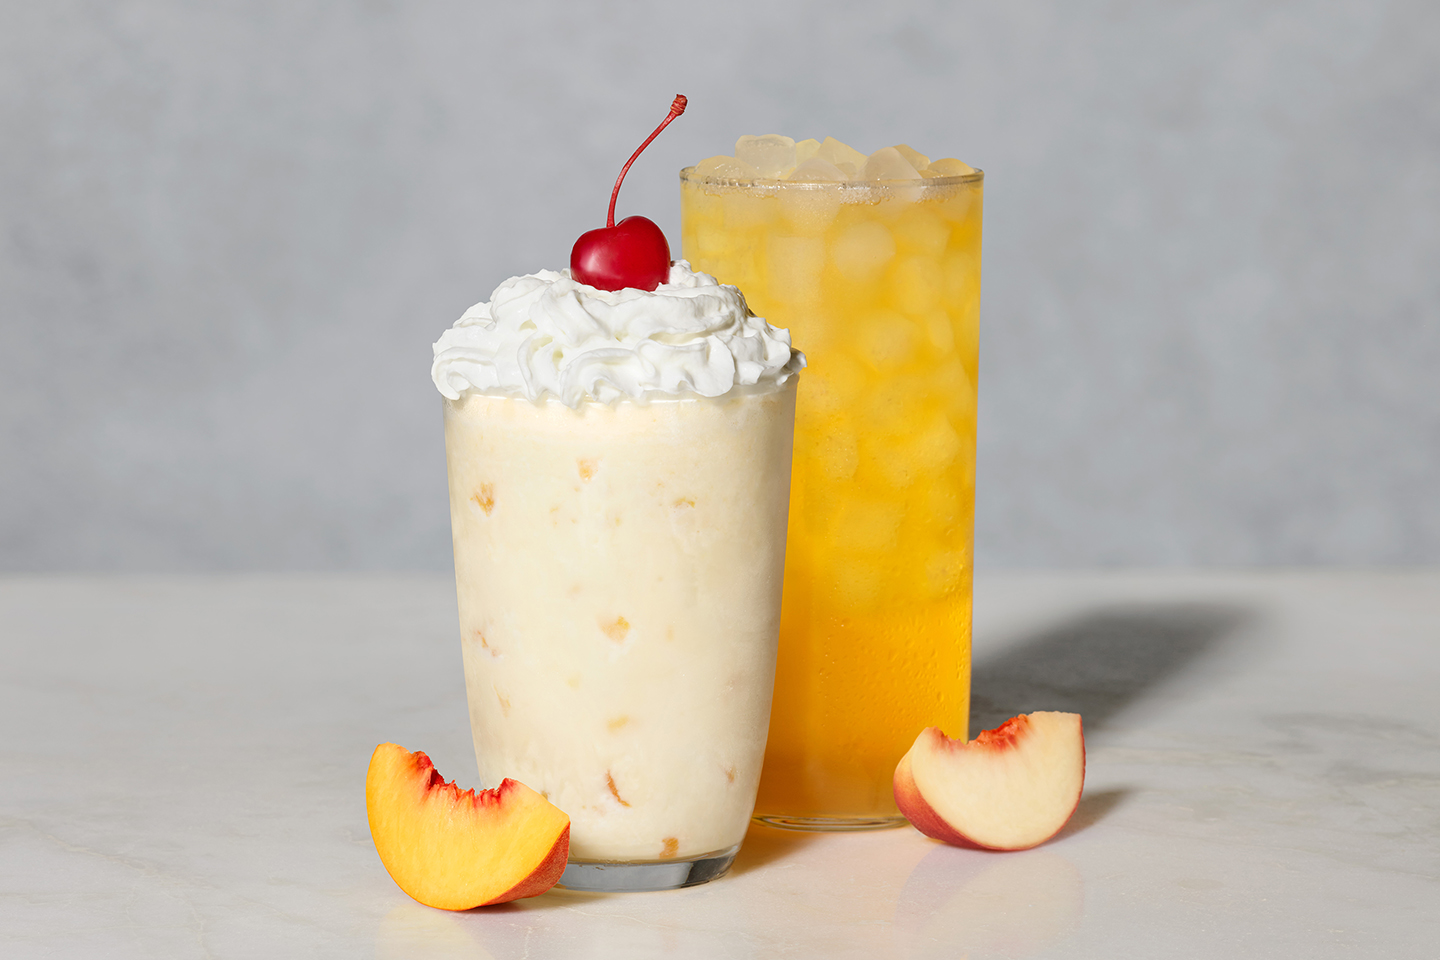 Chick-fil-A welcomes summer with Peach Milkshake and White Peach Sunjoy.